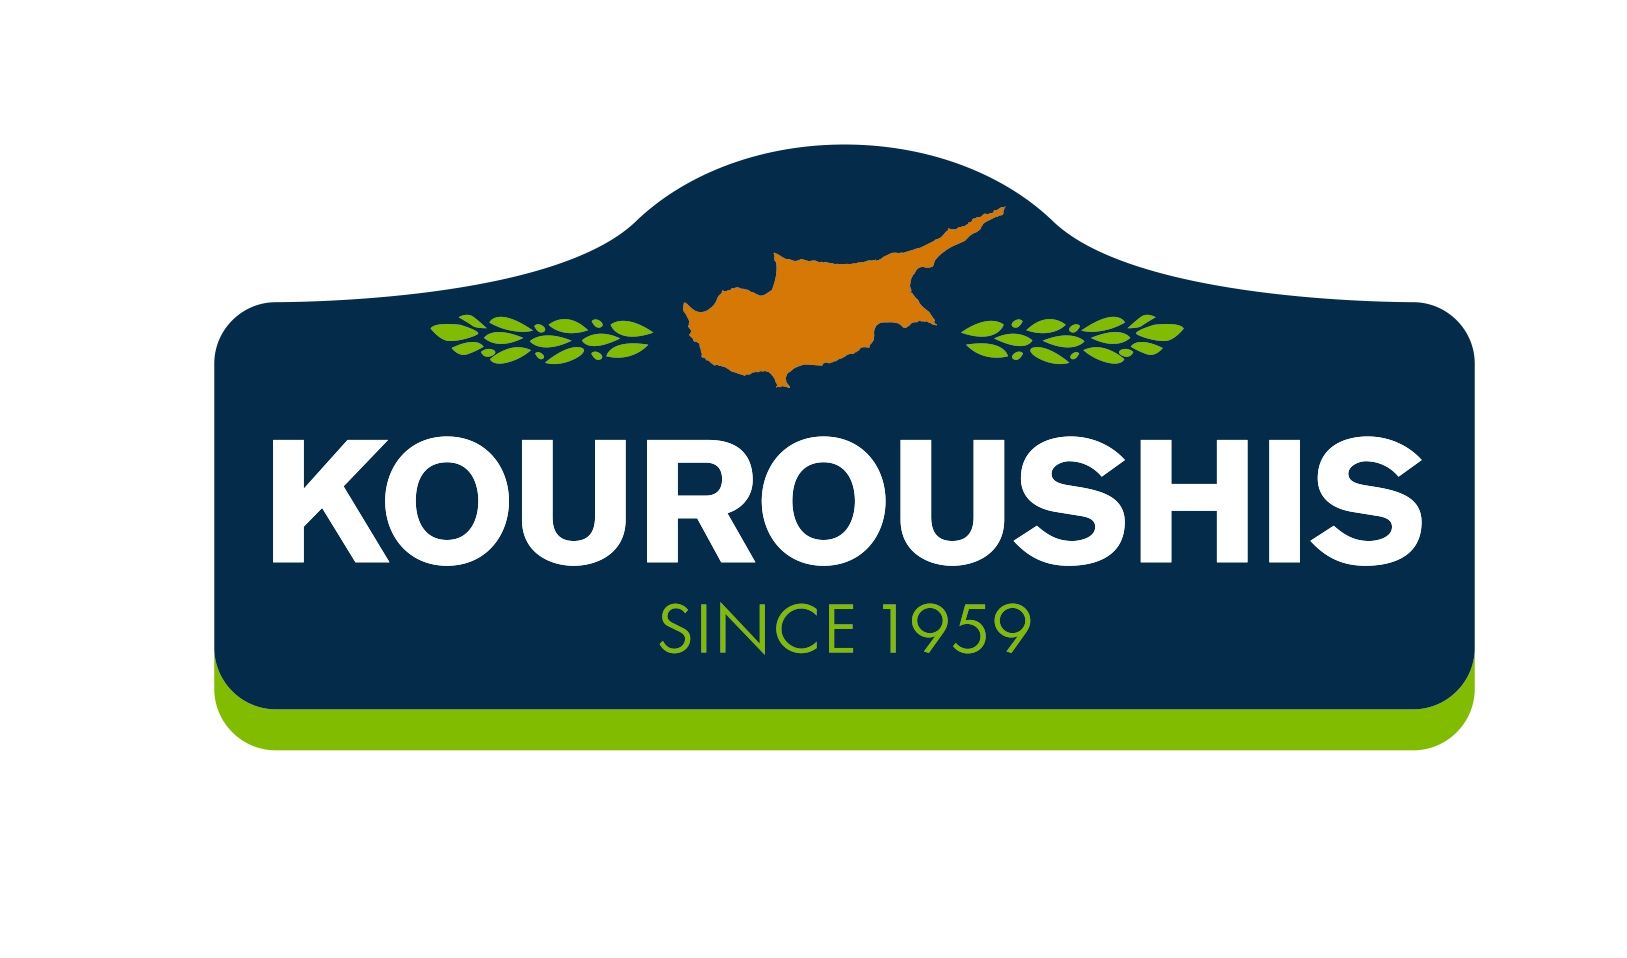 Kouroushis Dairy Products